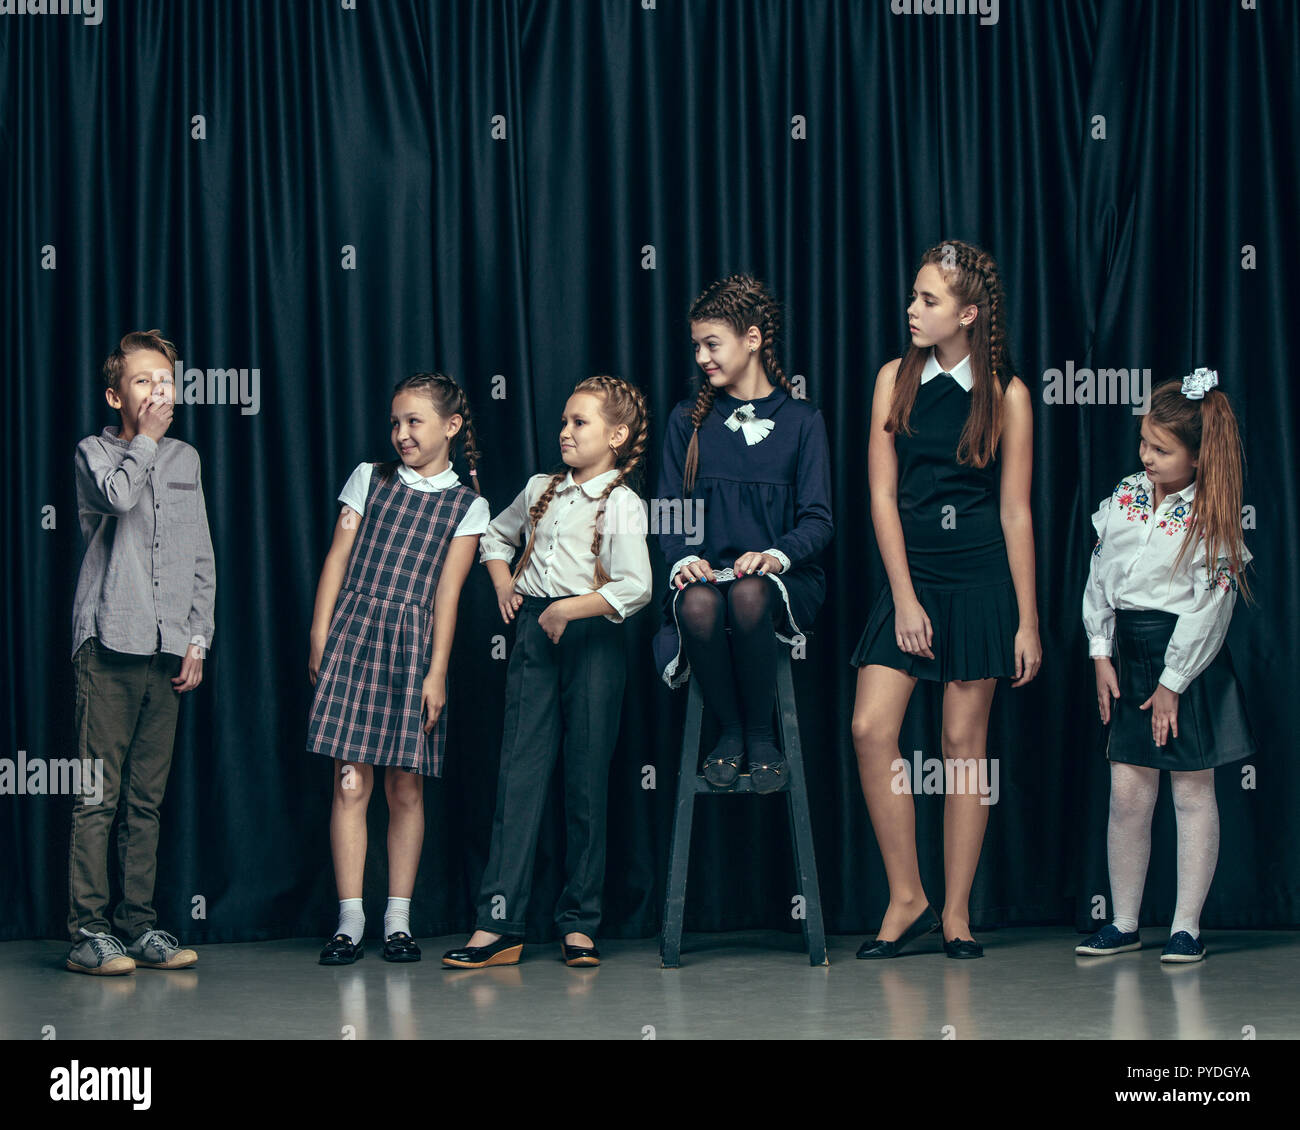 Cute surprised stylish children on dark background. Beautiful stylish teen  girls and boy standing together and posing on the school stage in front of  the curtain. Classic style. Kids fashion and emotions